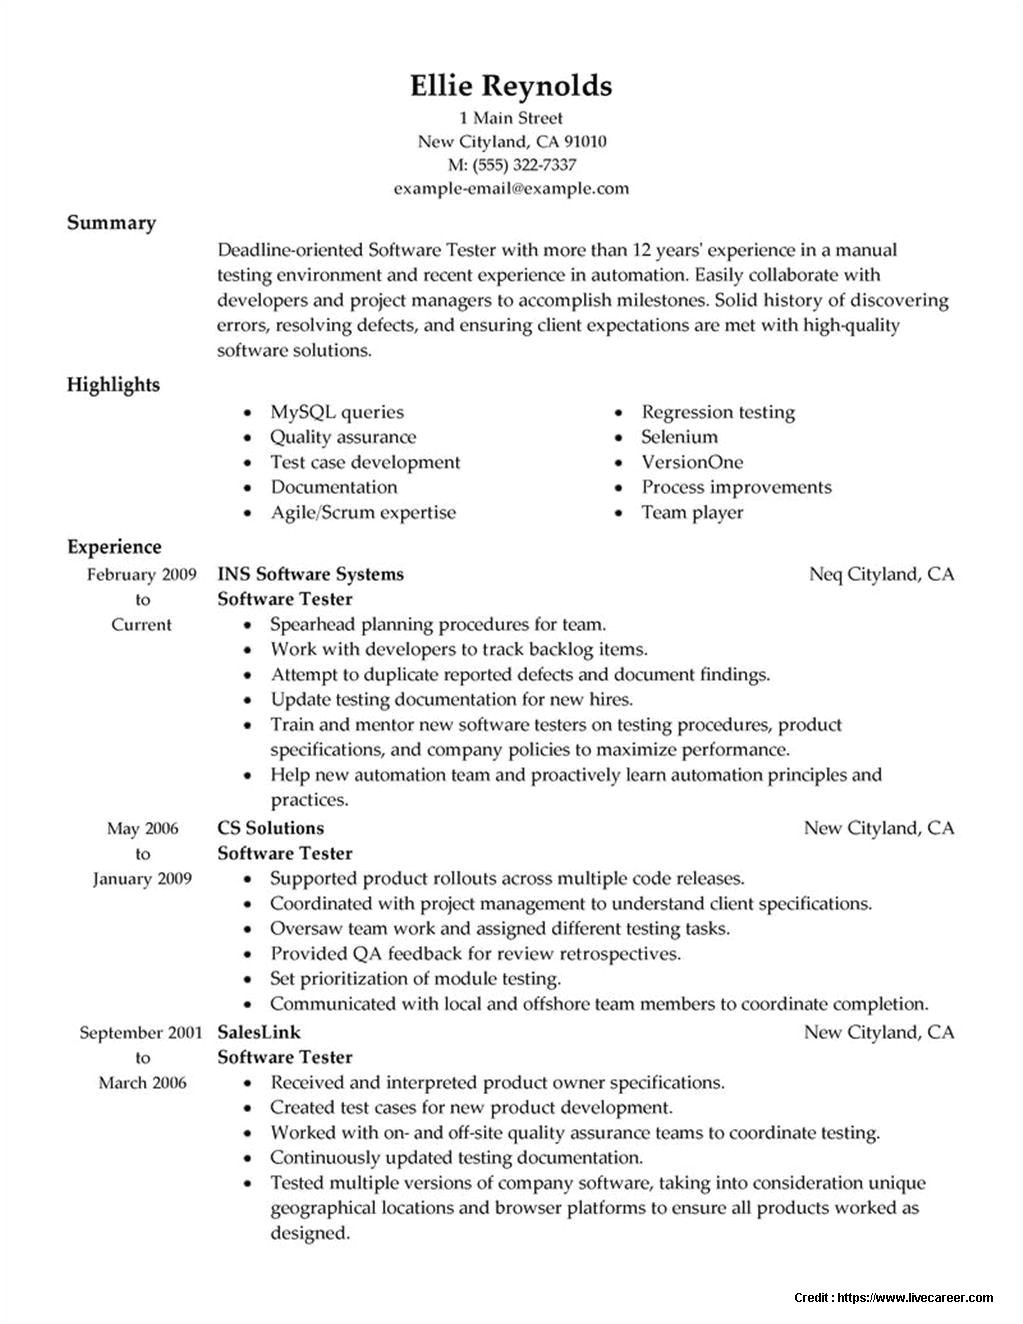 Resume Samples for Experienced Testing Professionals Resume Templates for Experienced software Testing